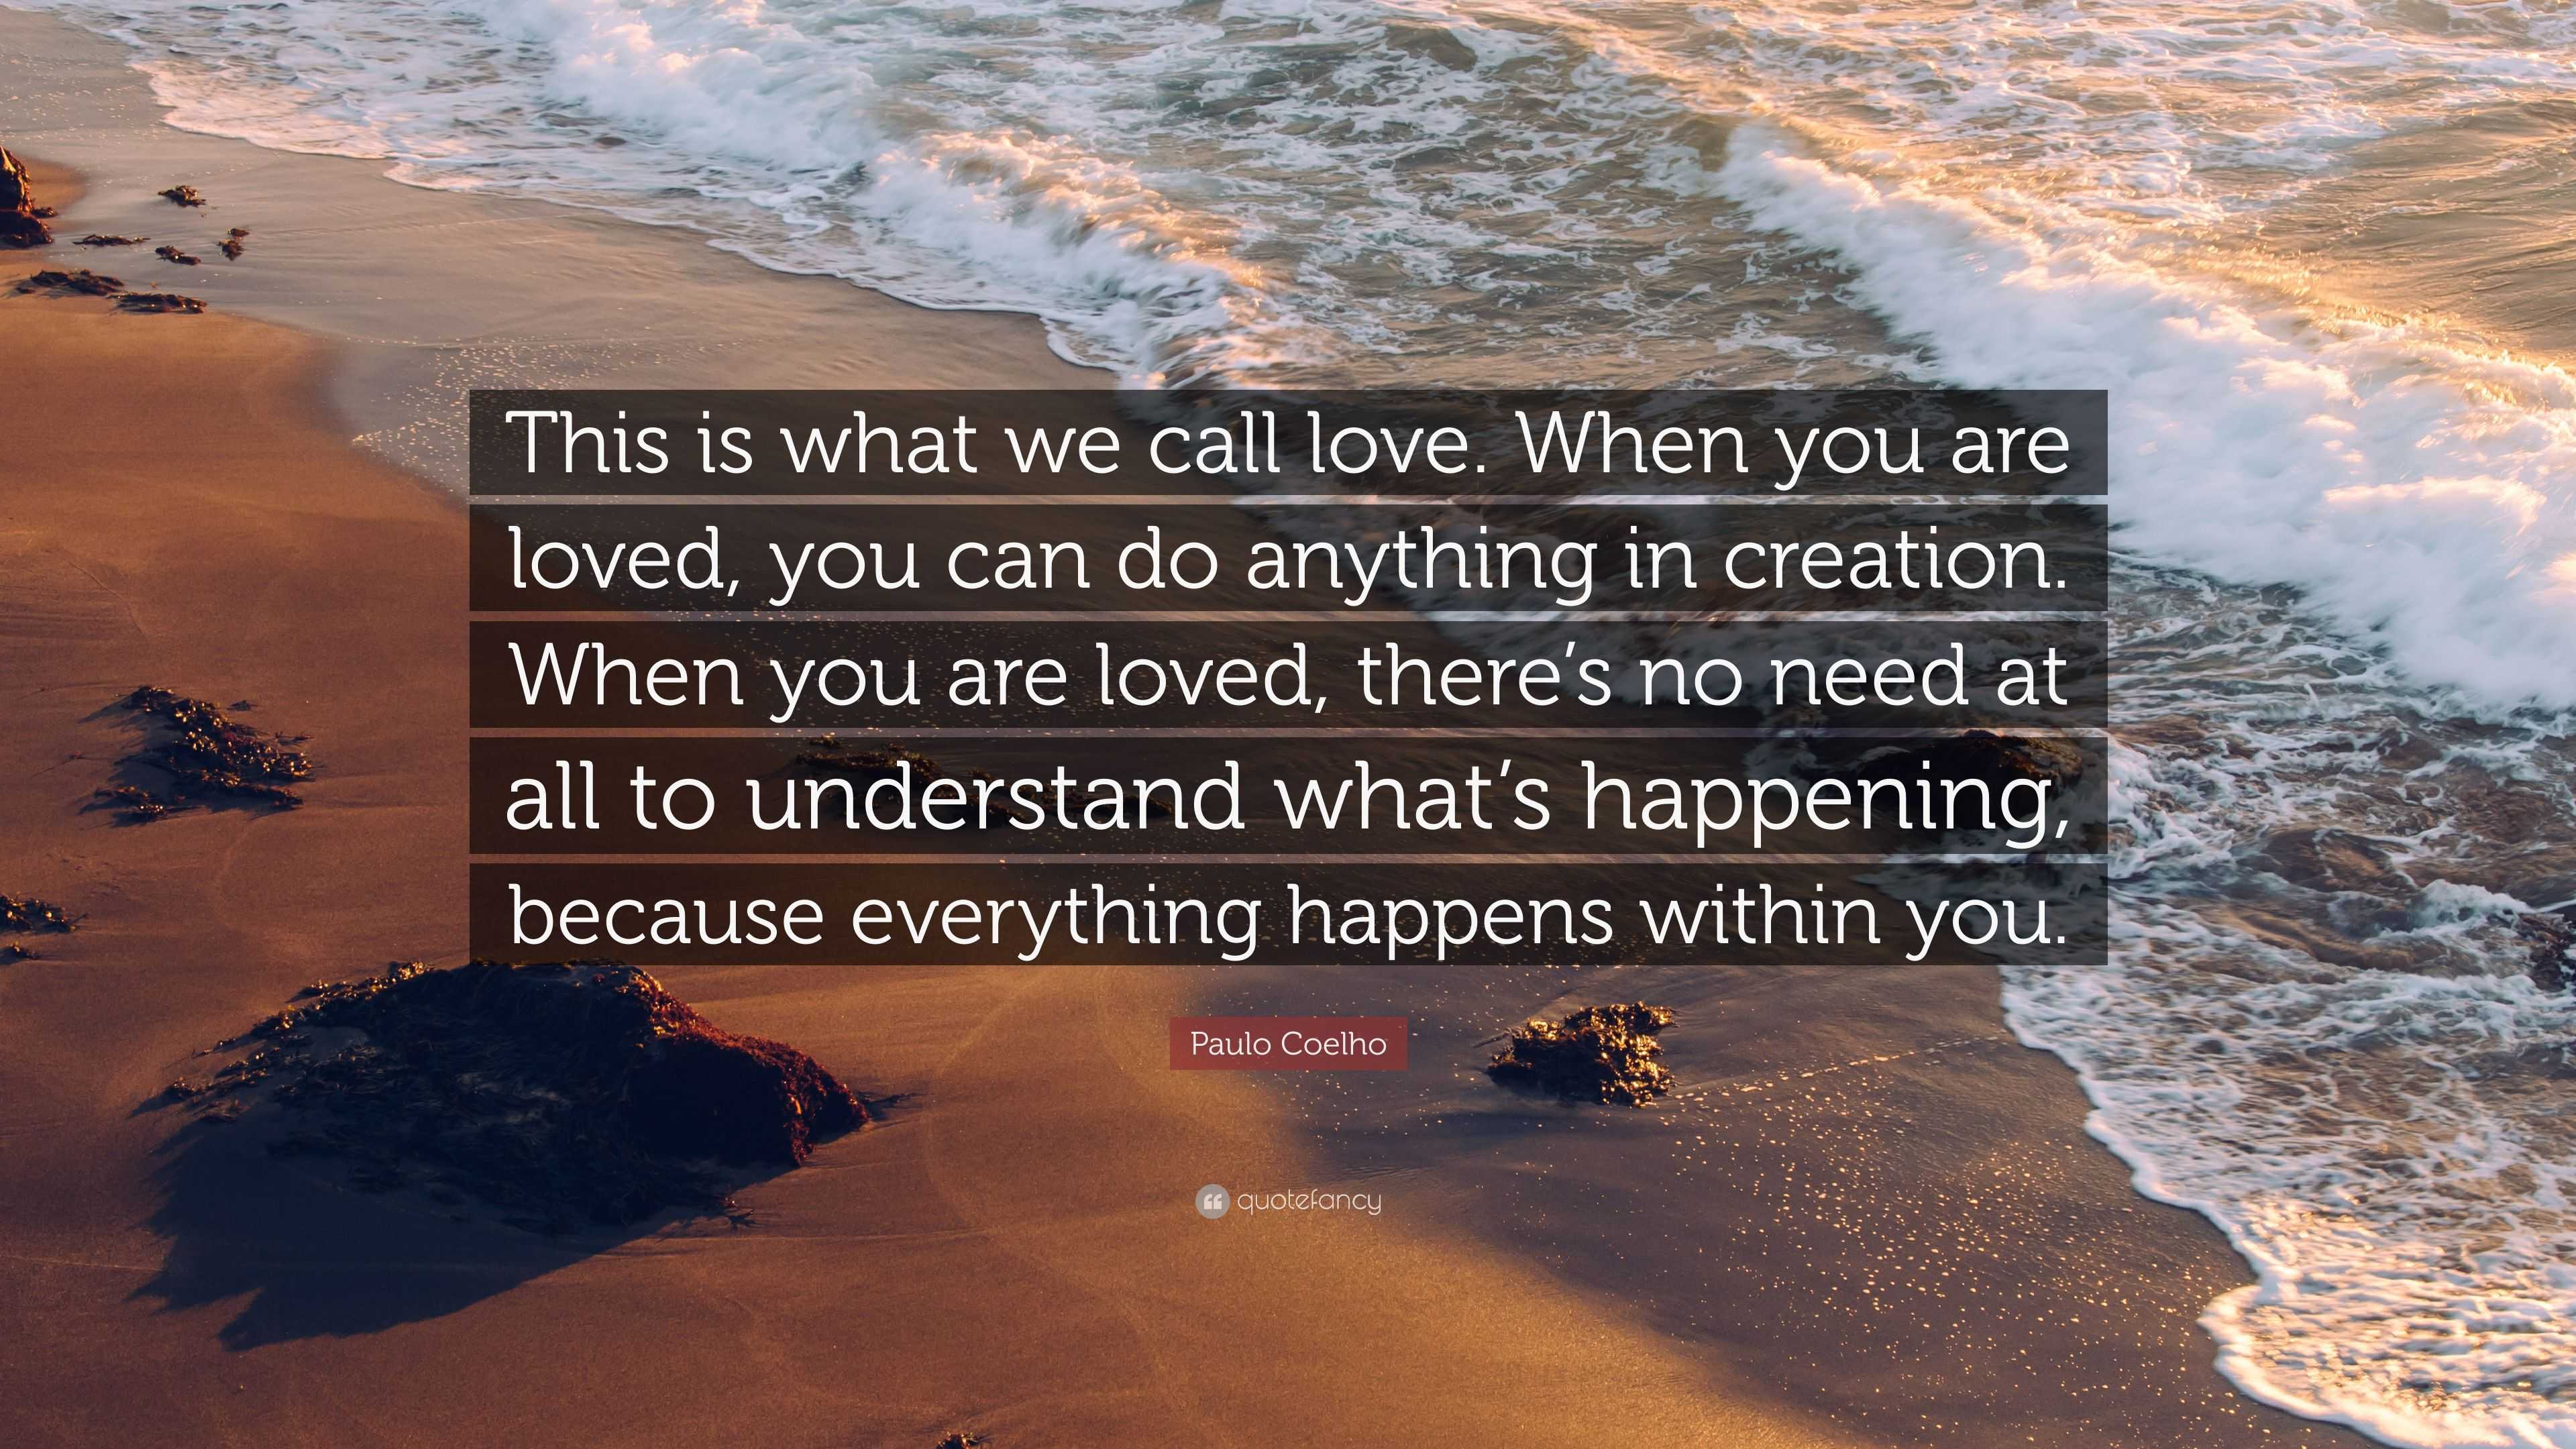 Paulo Coelho Quote: “This is what we call love. When you are loved, you ...